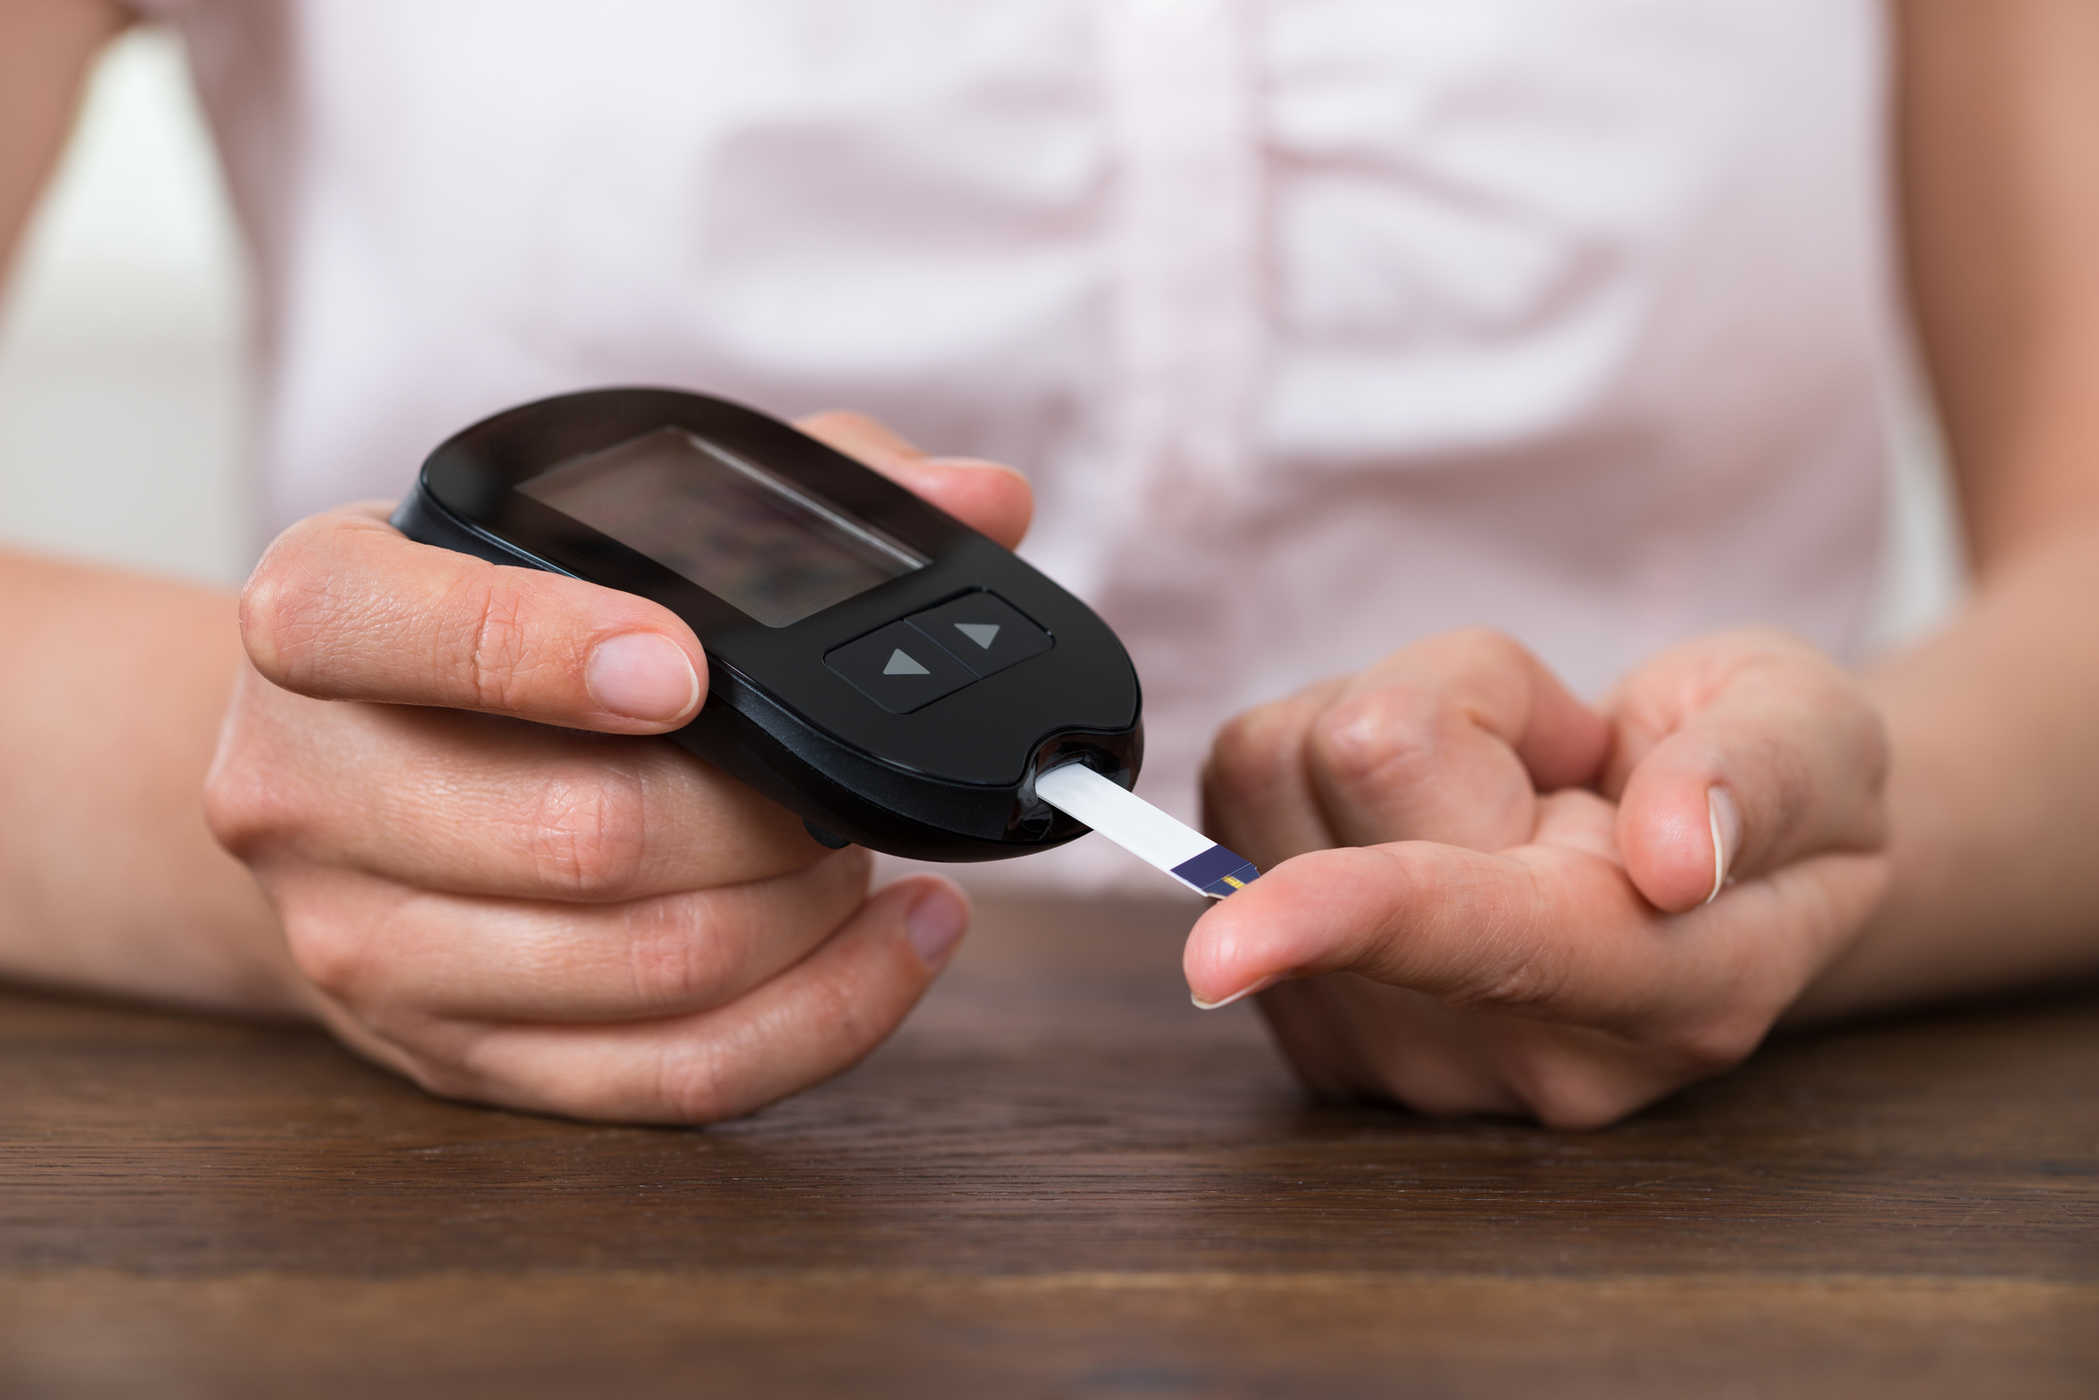 tips for maintaining blood sugar levels while fasting